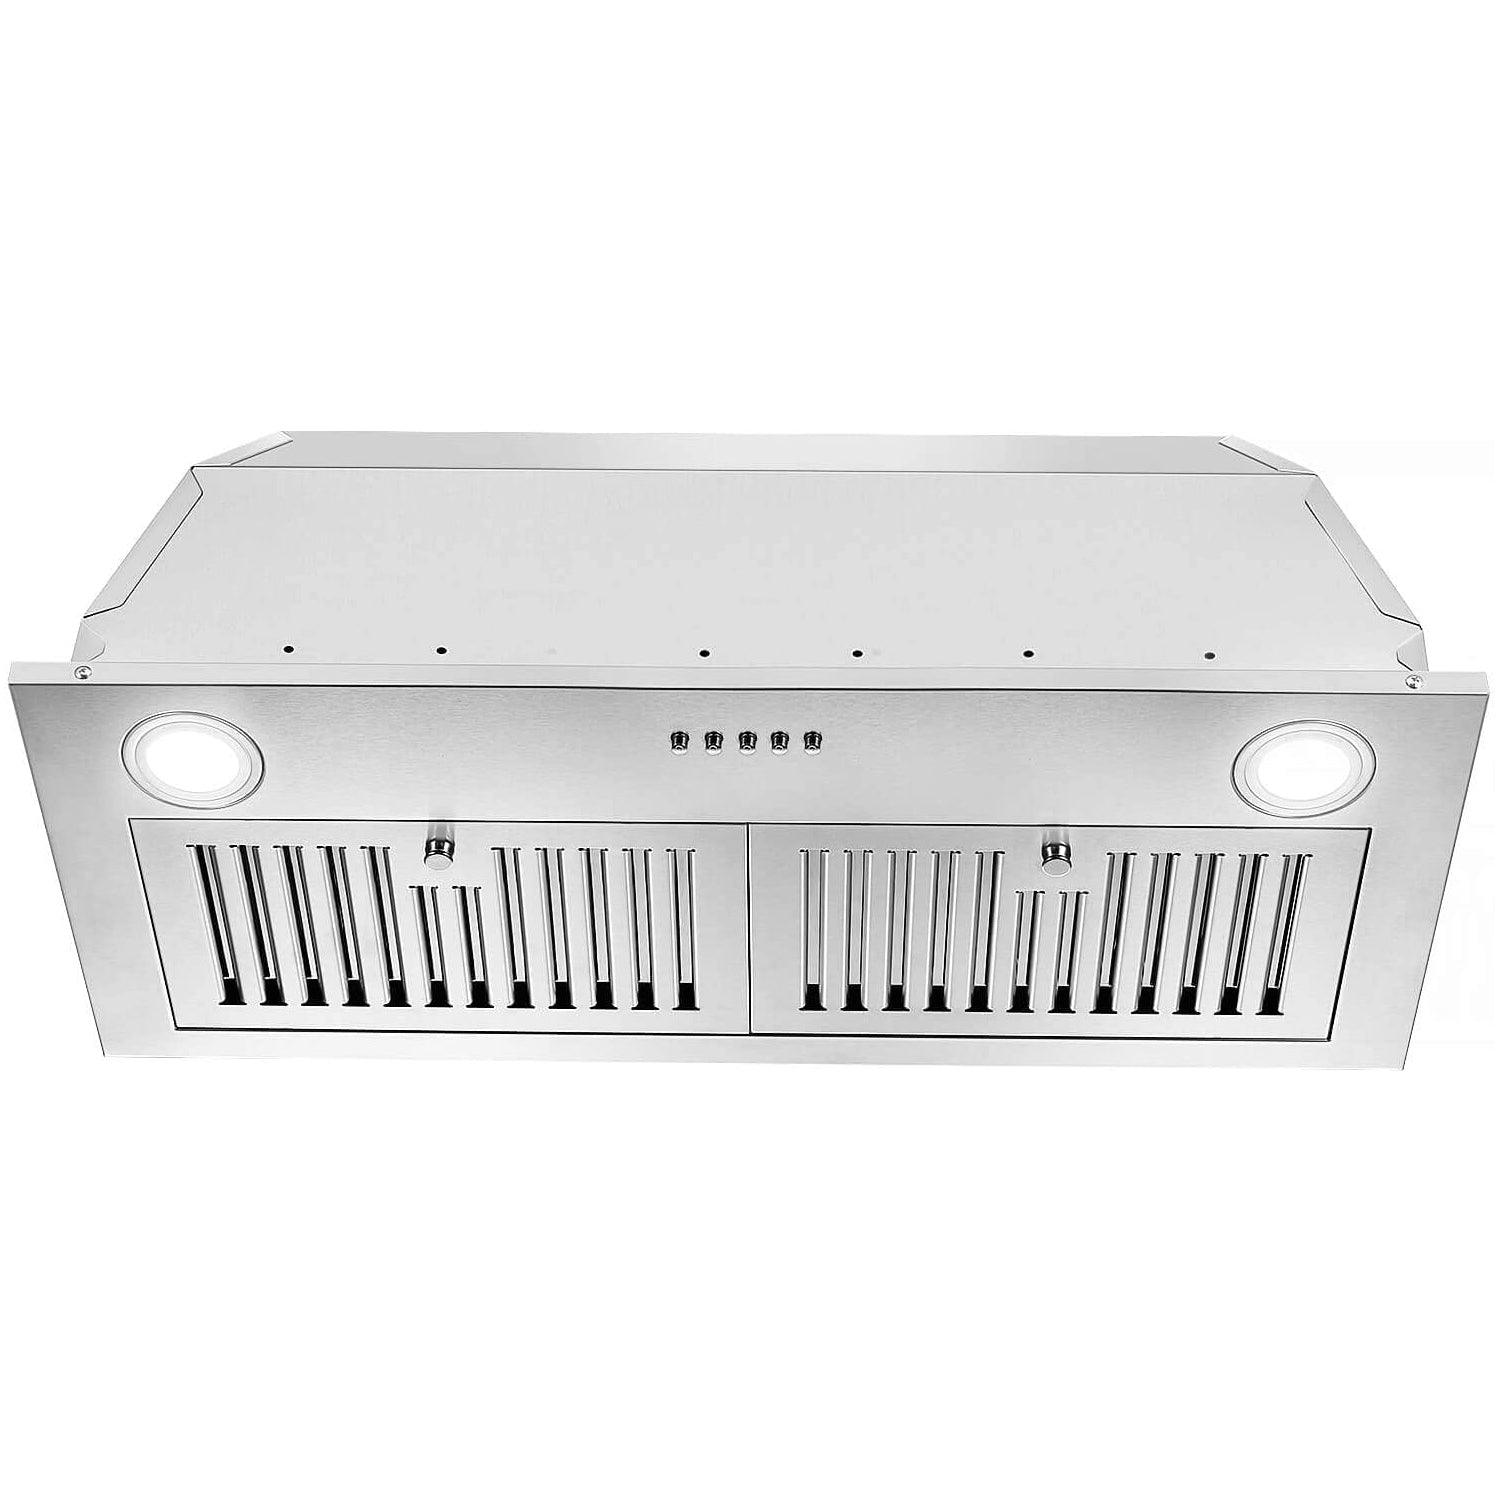 Iseasy 30 600 CFM Convertible Stainless Steel Under Cabinet Range Hood with Charcoal Filter 18424